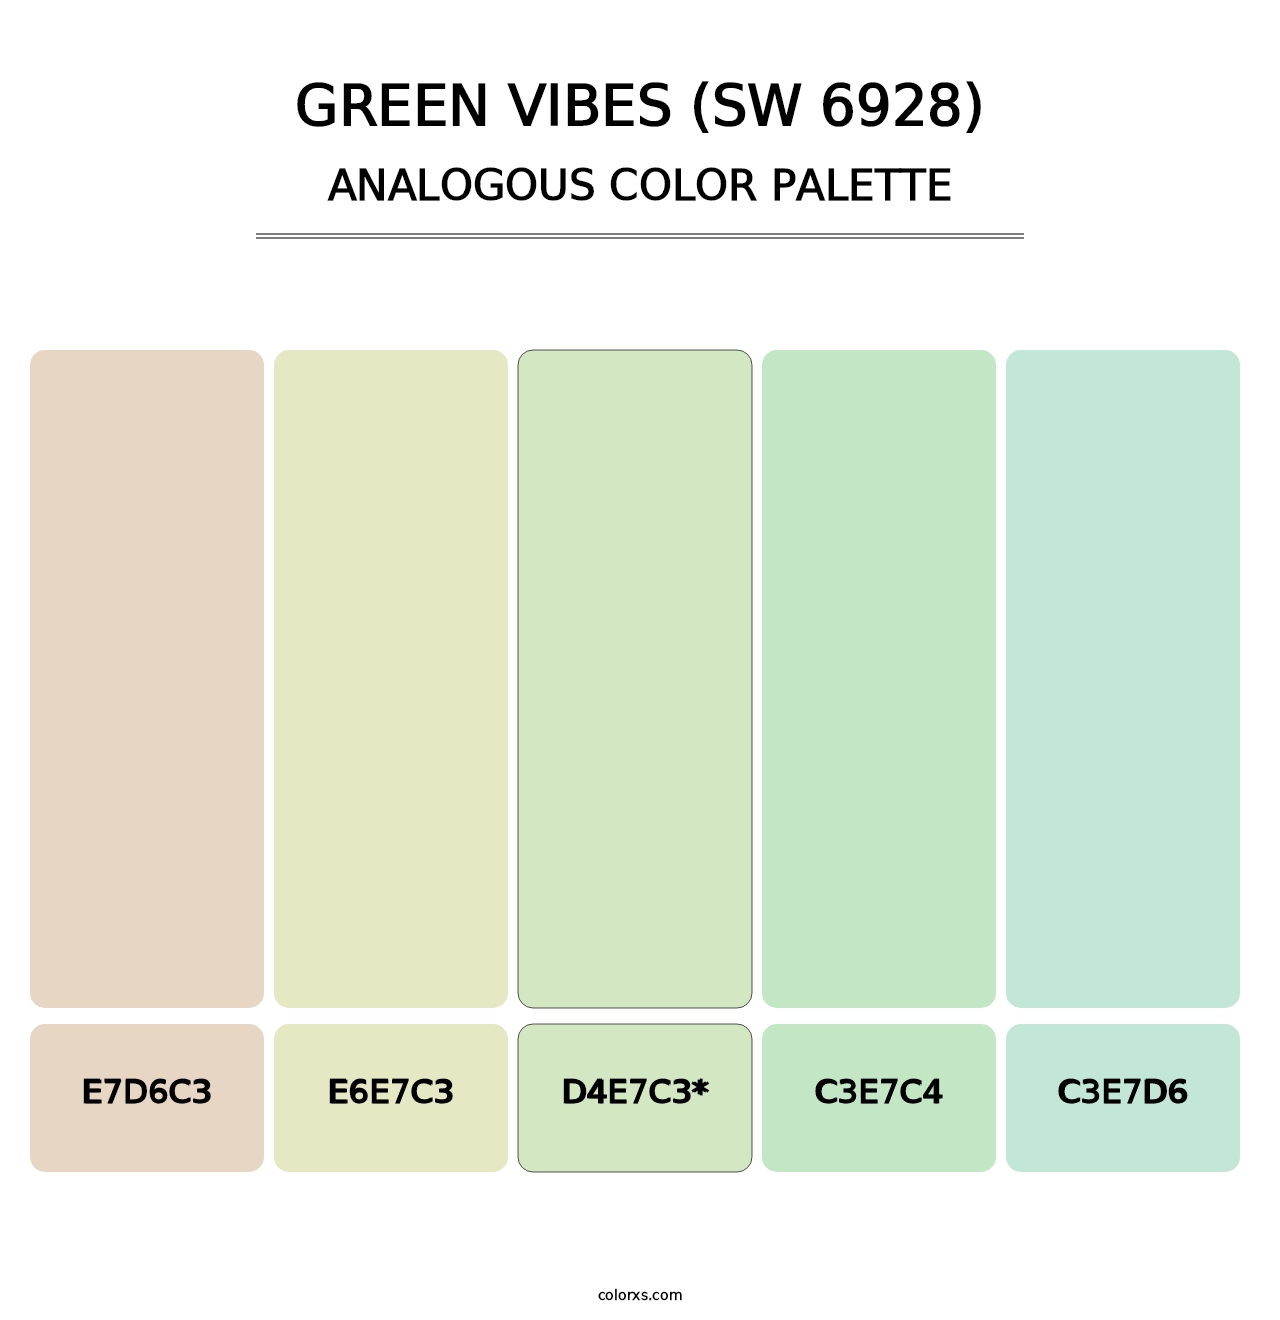 Green Vibes (SW 6928) - Analogous Color Palette